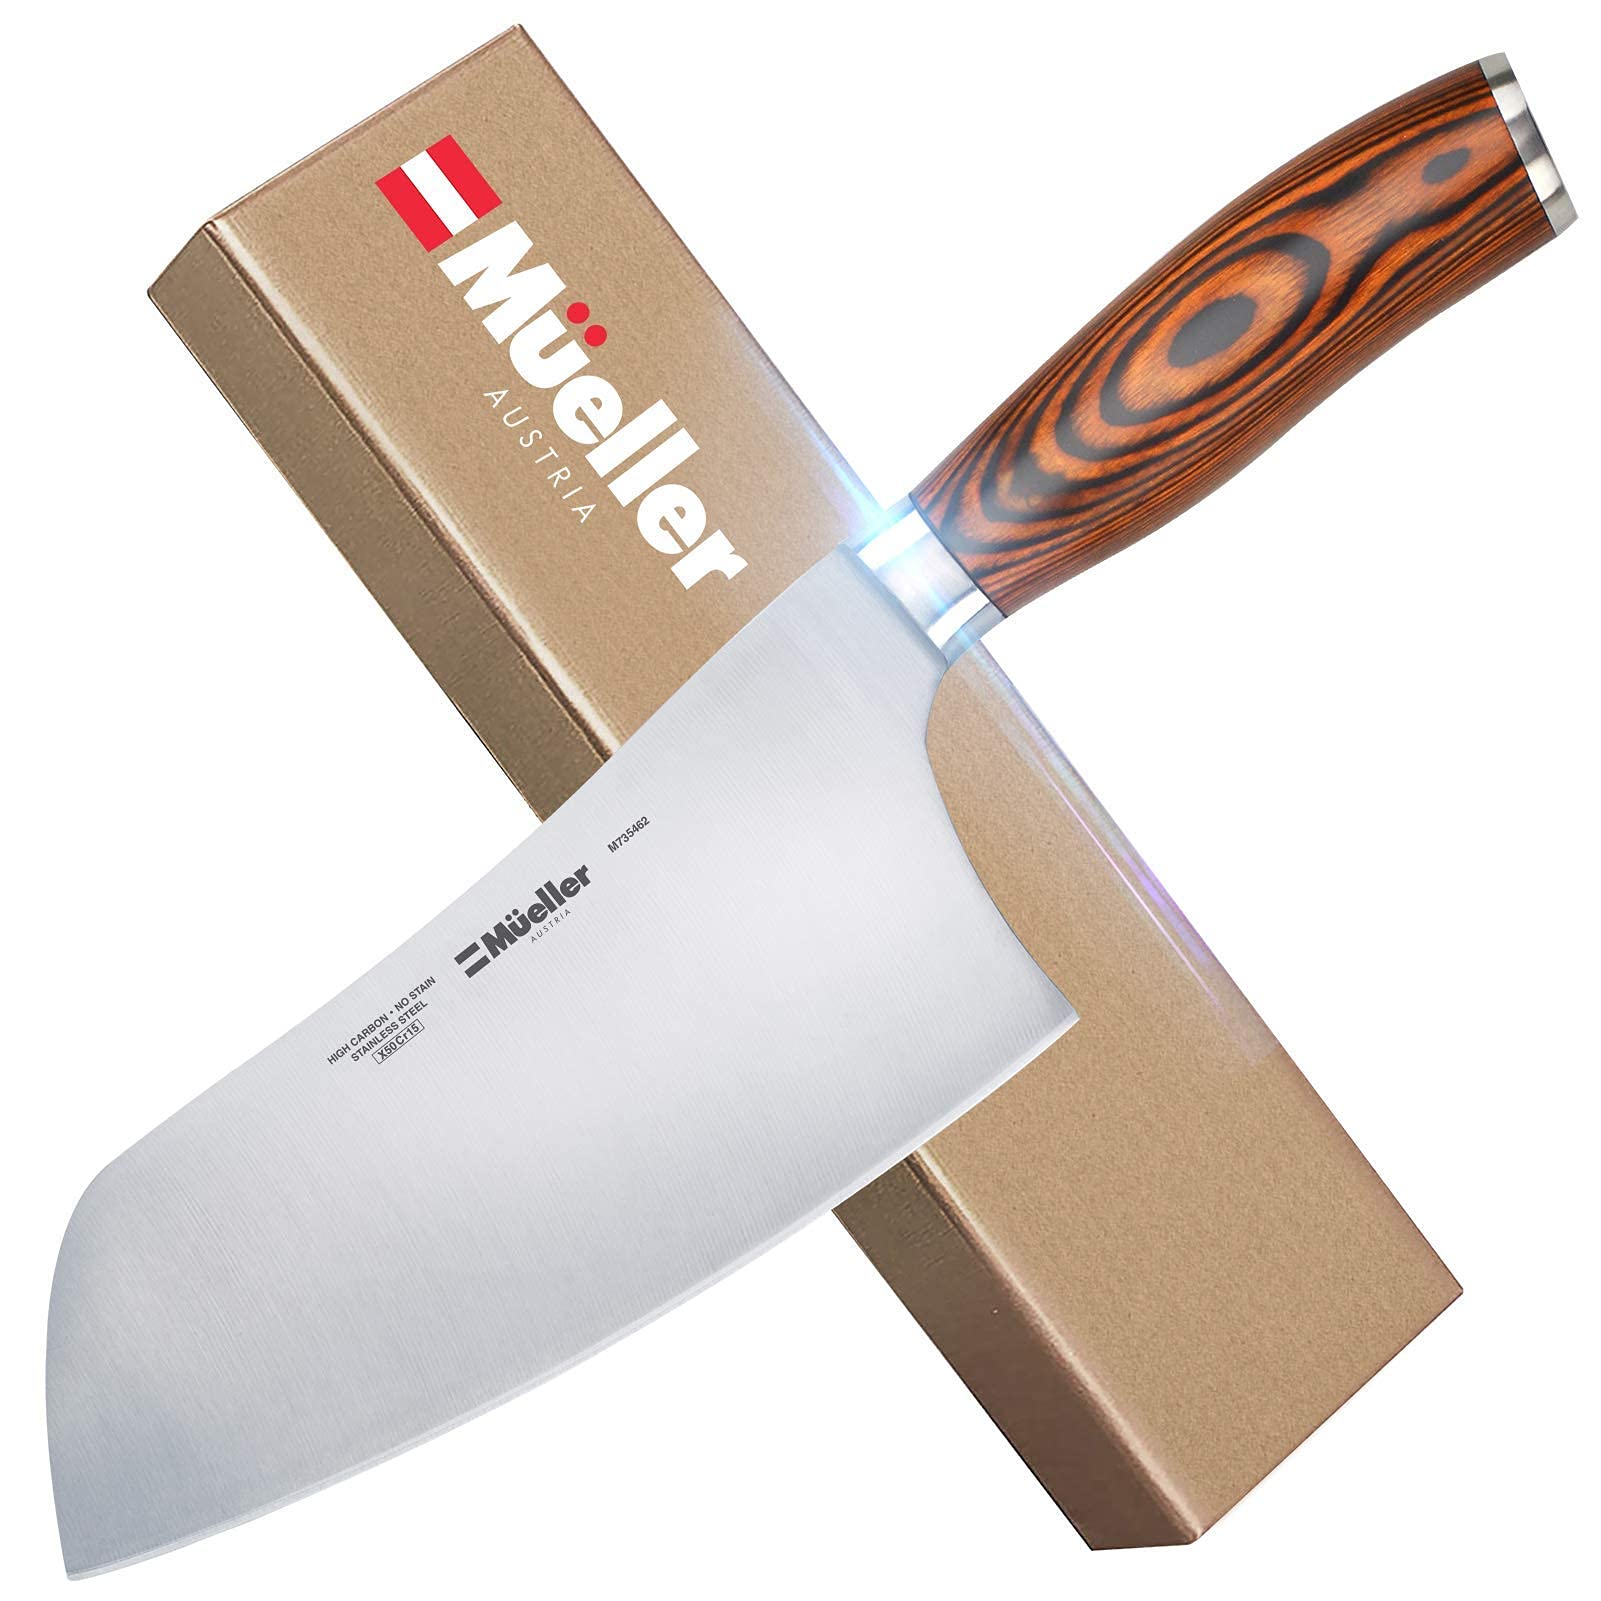 Mueller 7-inch Cleaver Knife, Vegetable Meat Chinese Chef’s Knife, German Stainless Steel with Ergonomic Pakkawood Handle, for Home Kitchen and Restaurant $12